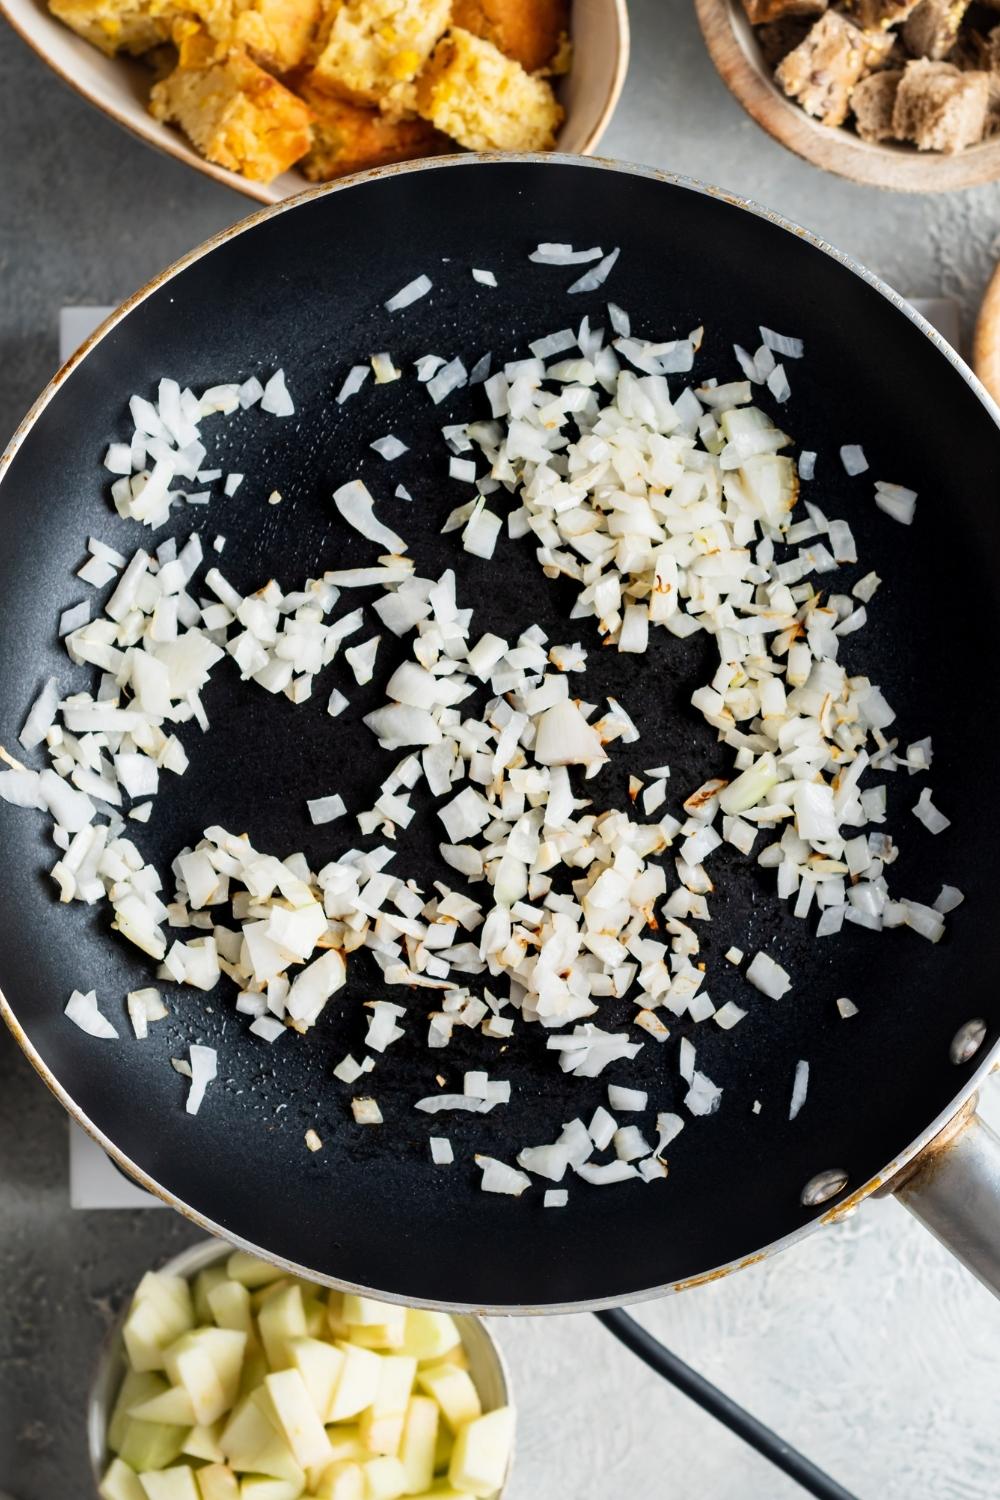 An overhead view of diced onions in a frying pan being cooked.